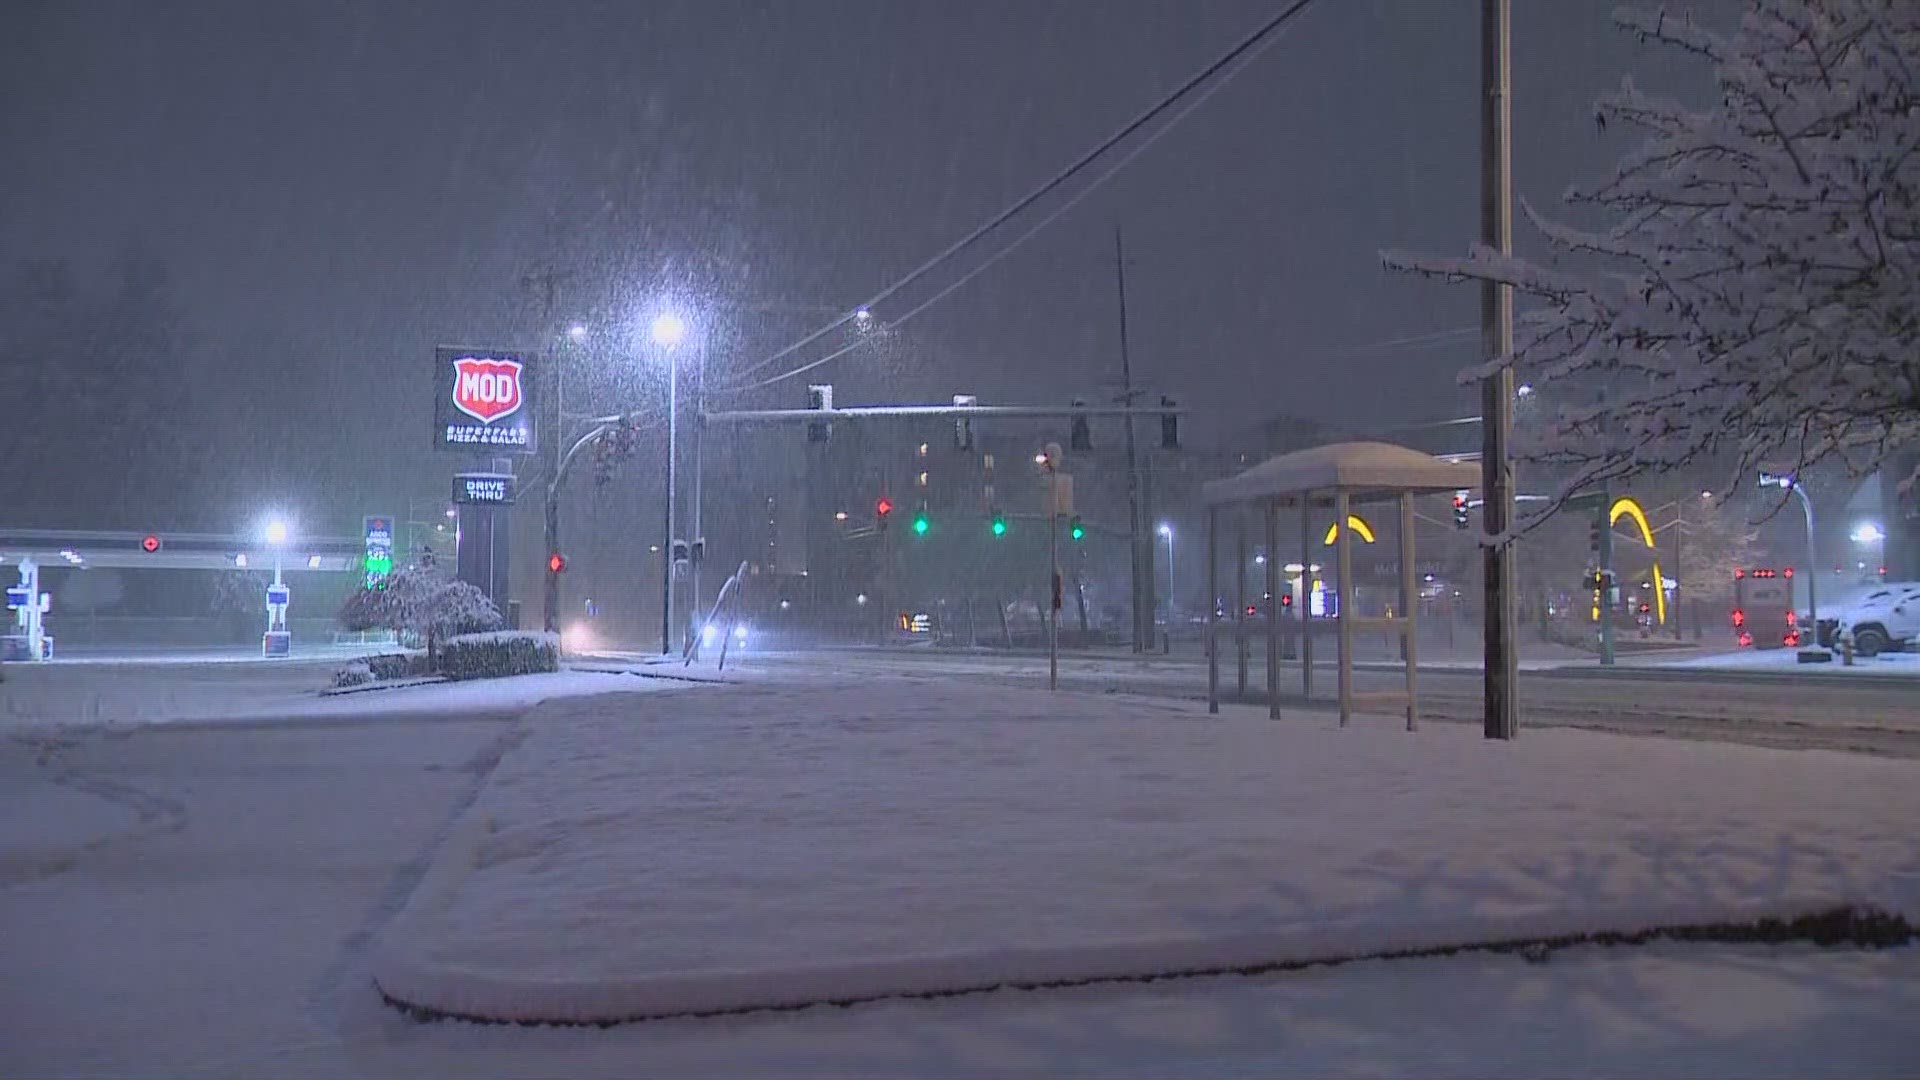 Snow and slush continue to be a factor for drivers in Everett and over the mountain passes